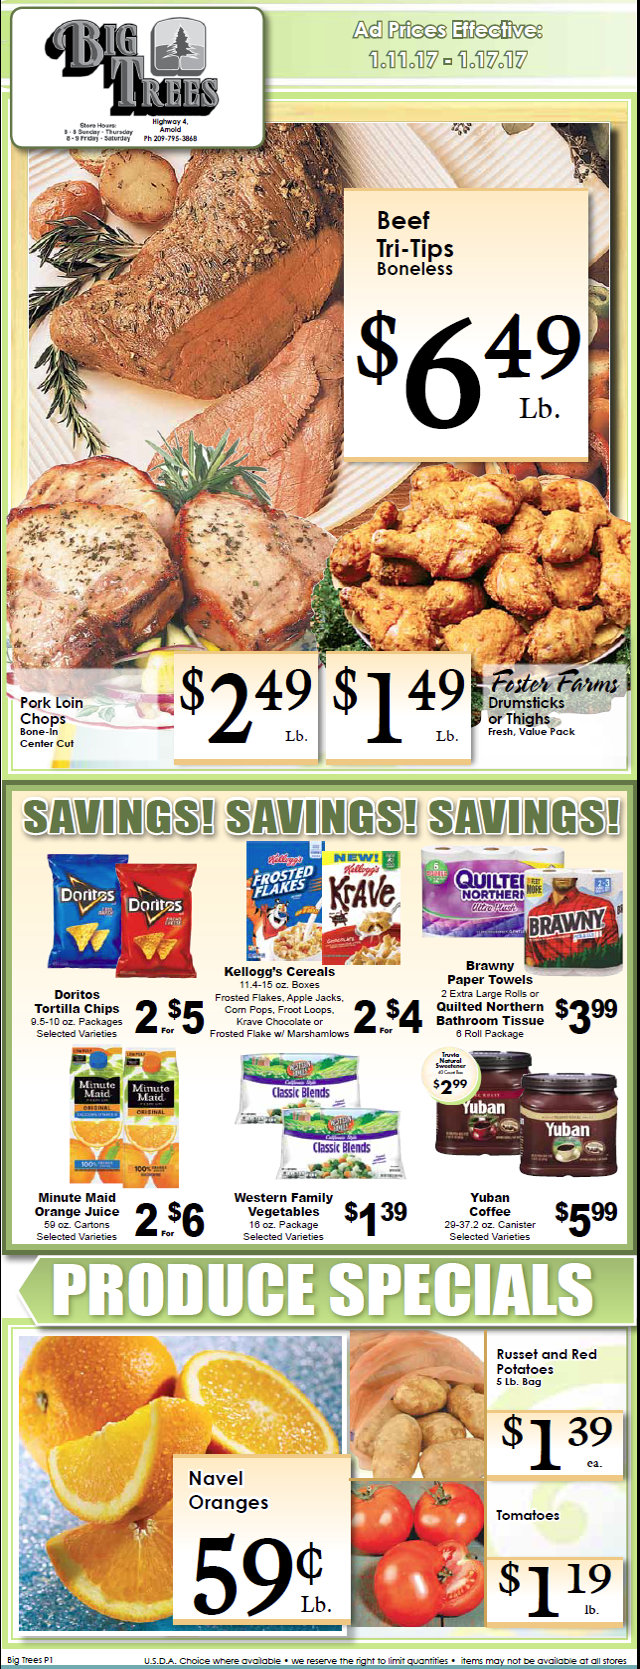 Big Trees Market Weekly Ad & Grocery Specials Through January 17th